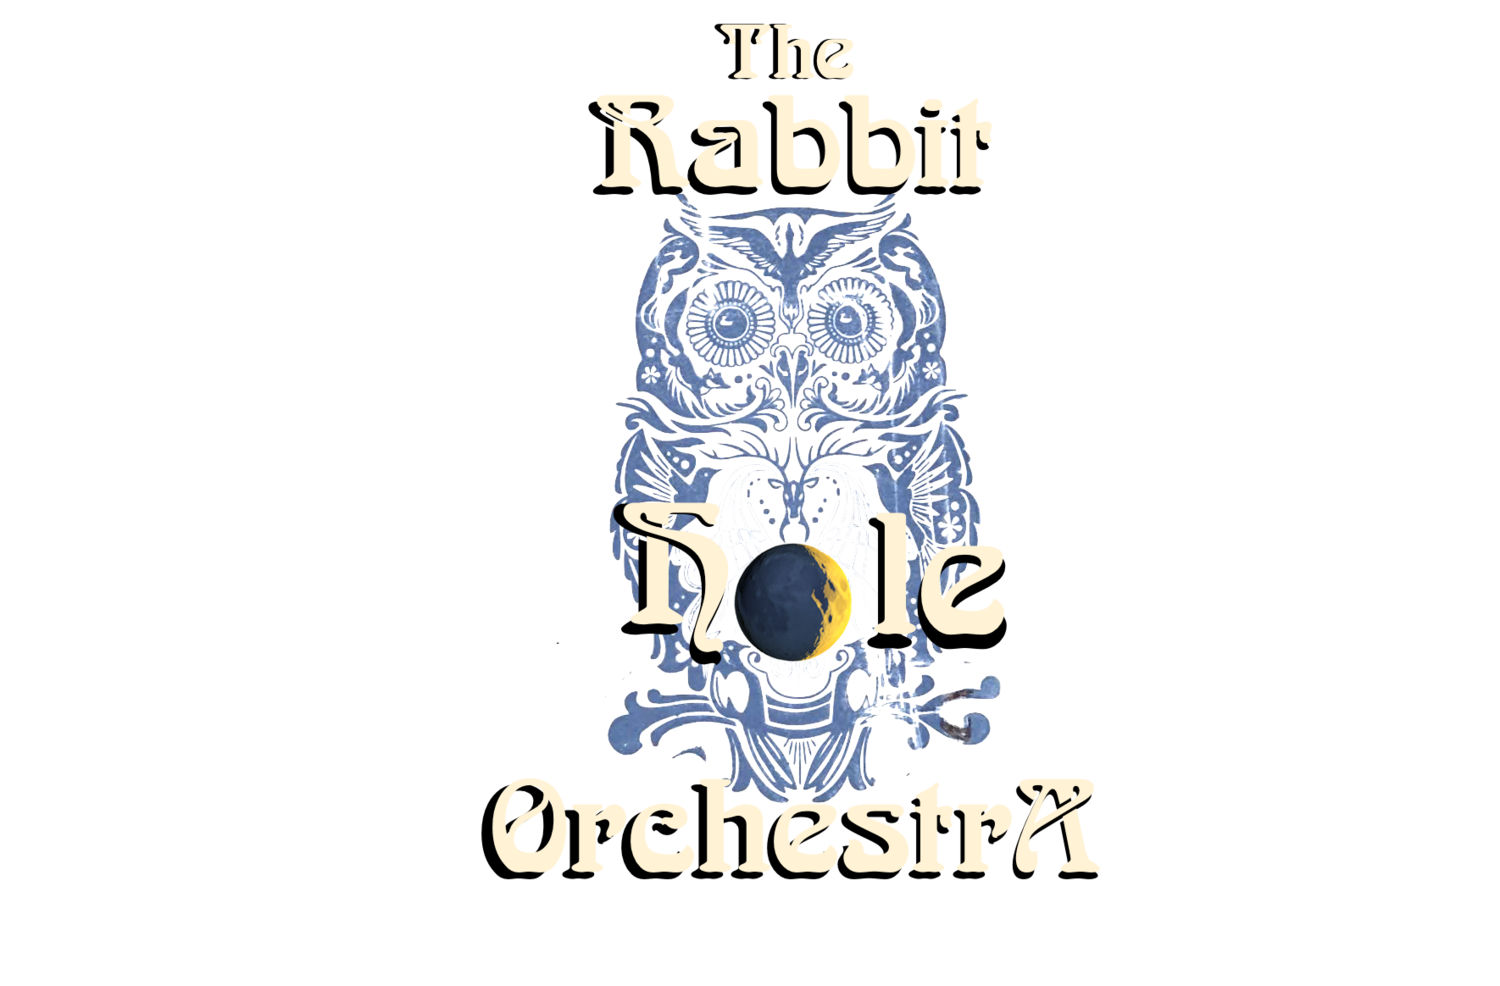 The Rabbit Hole Orchestra